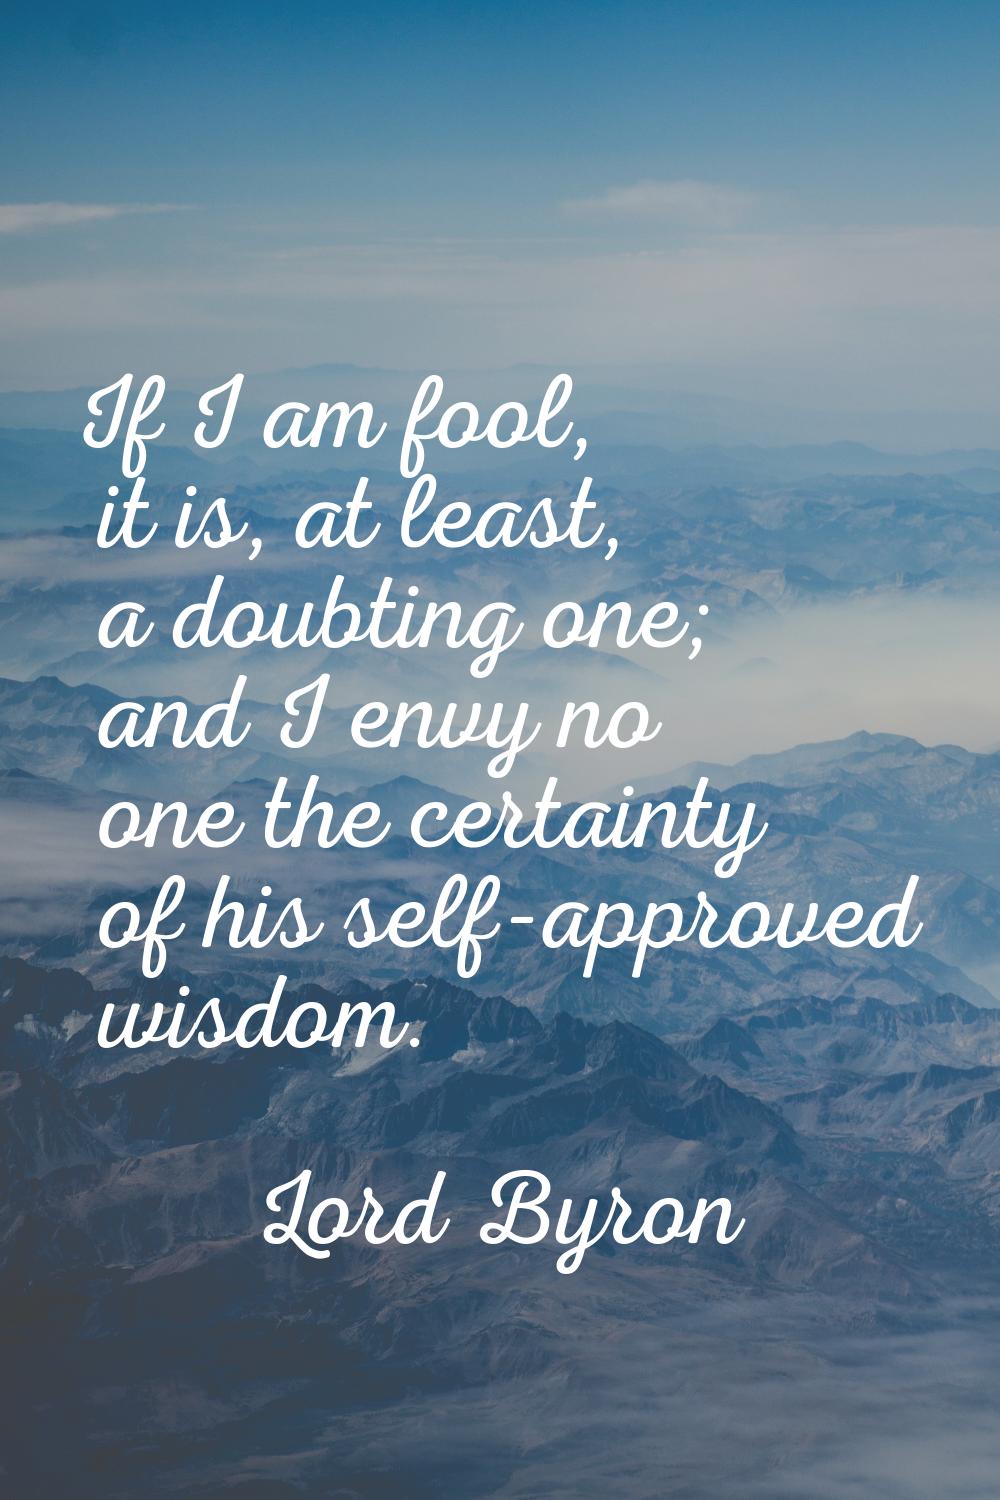 If I am fool, it is, at least, a doubting one; and I envy no one the certainty of his self-approved